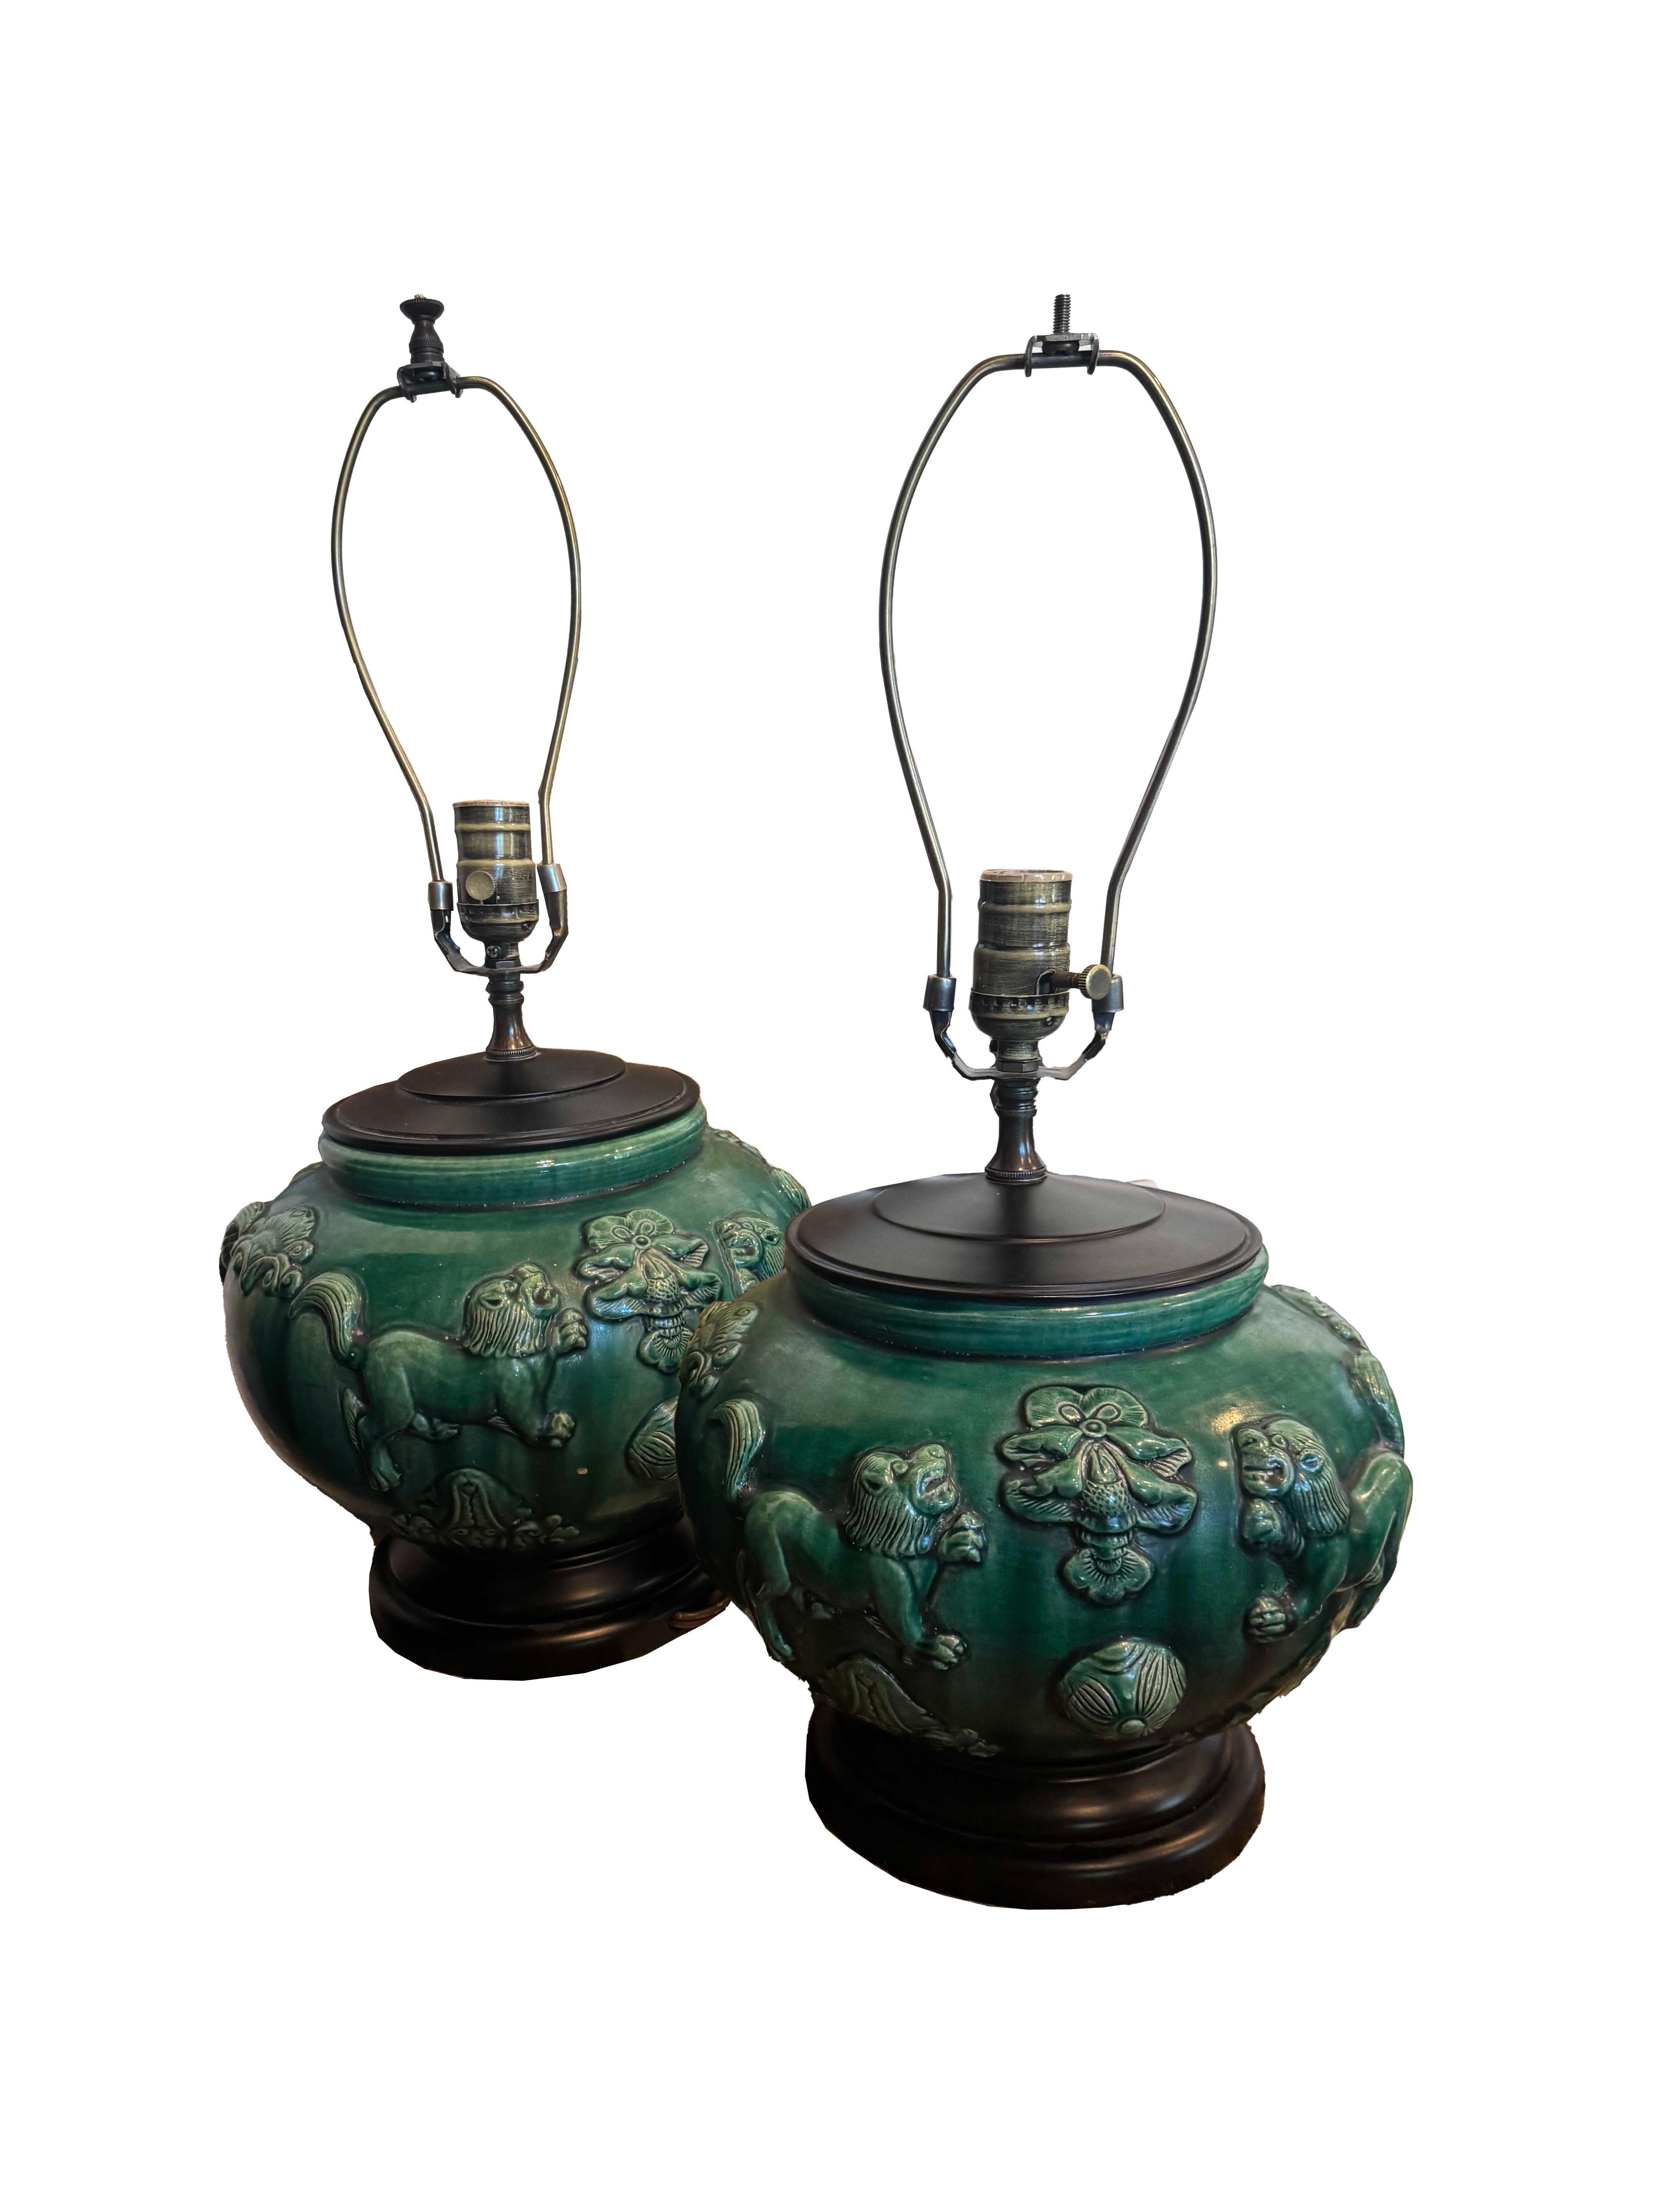 Add a touch of elegance and exotic flair to your living space with this stunning pair of Green Chinese glazed ceramic vase lamps. Crafted with meticulous attention to detail, each lamp boasts intricate reliefs of majestic lions and delicate floral